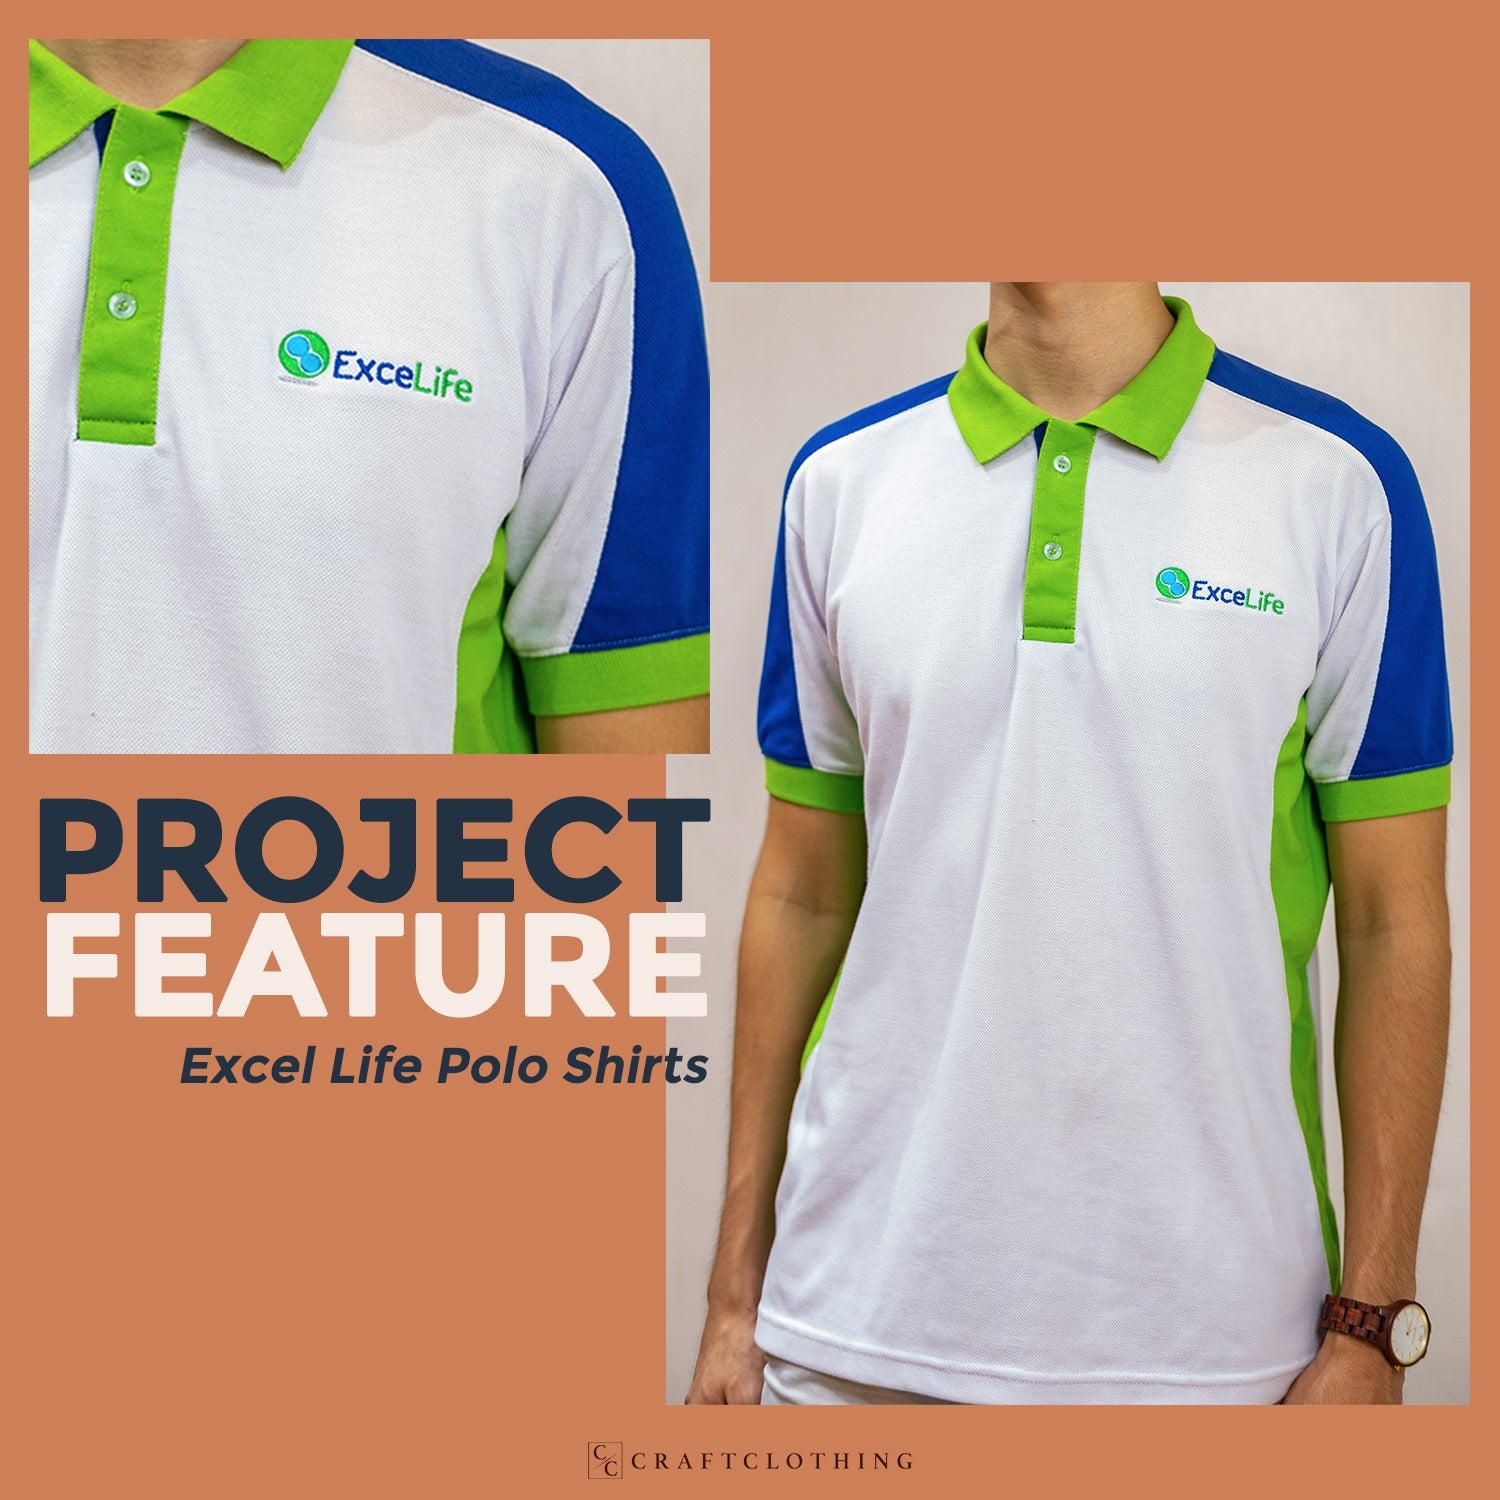 PROJECT FEATURE: Excel Life Polo Shirts